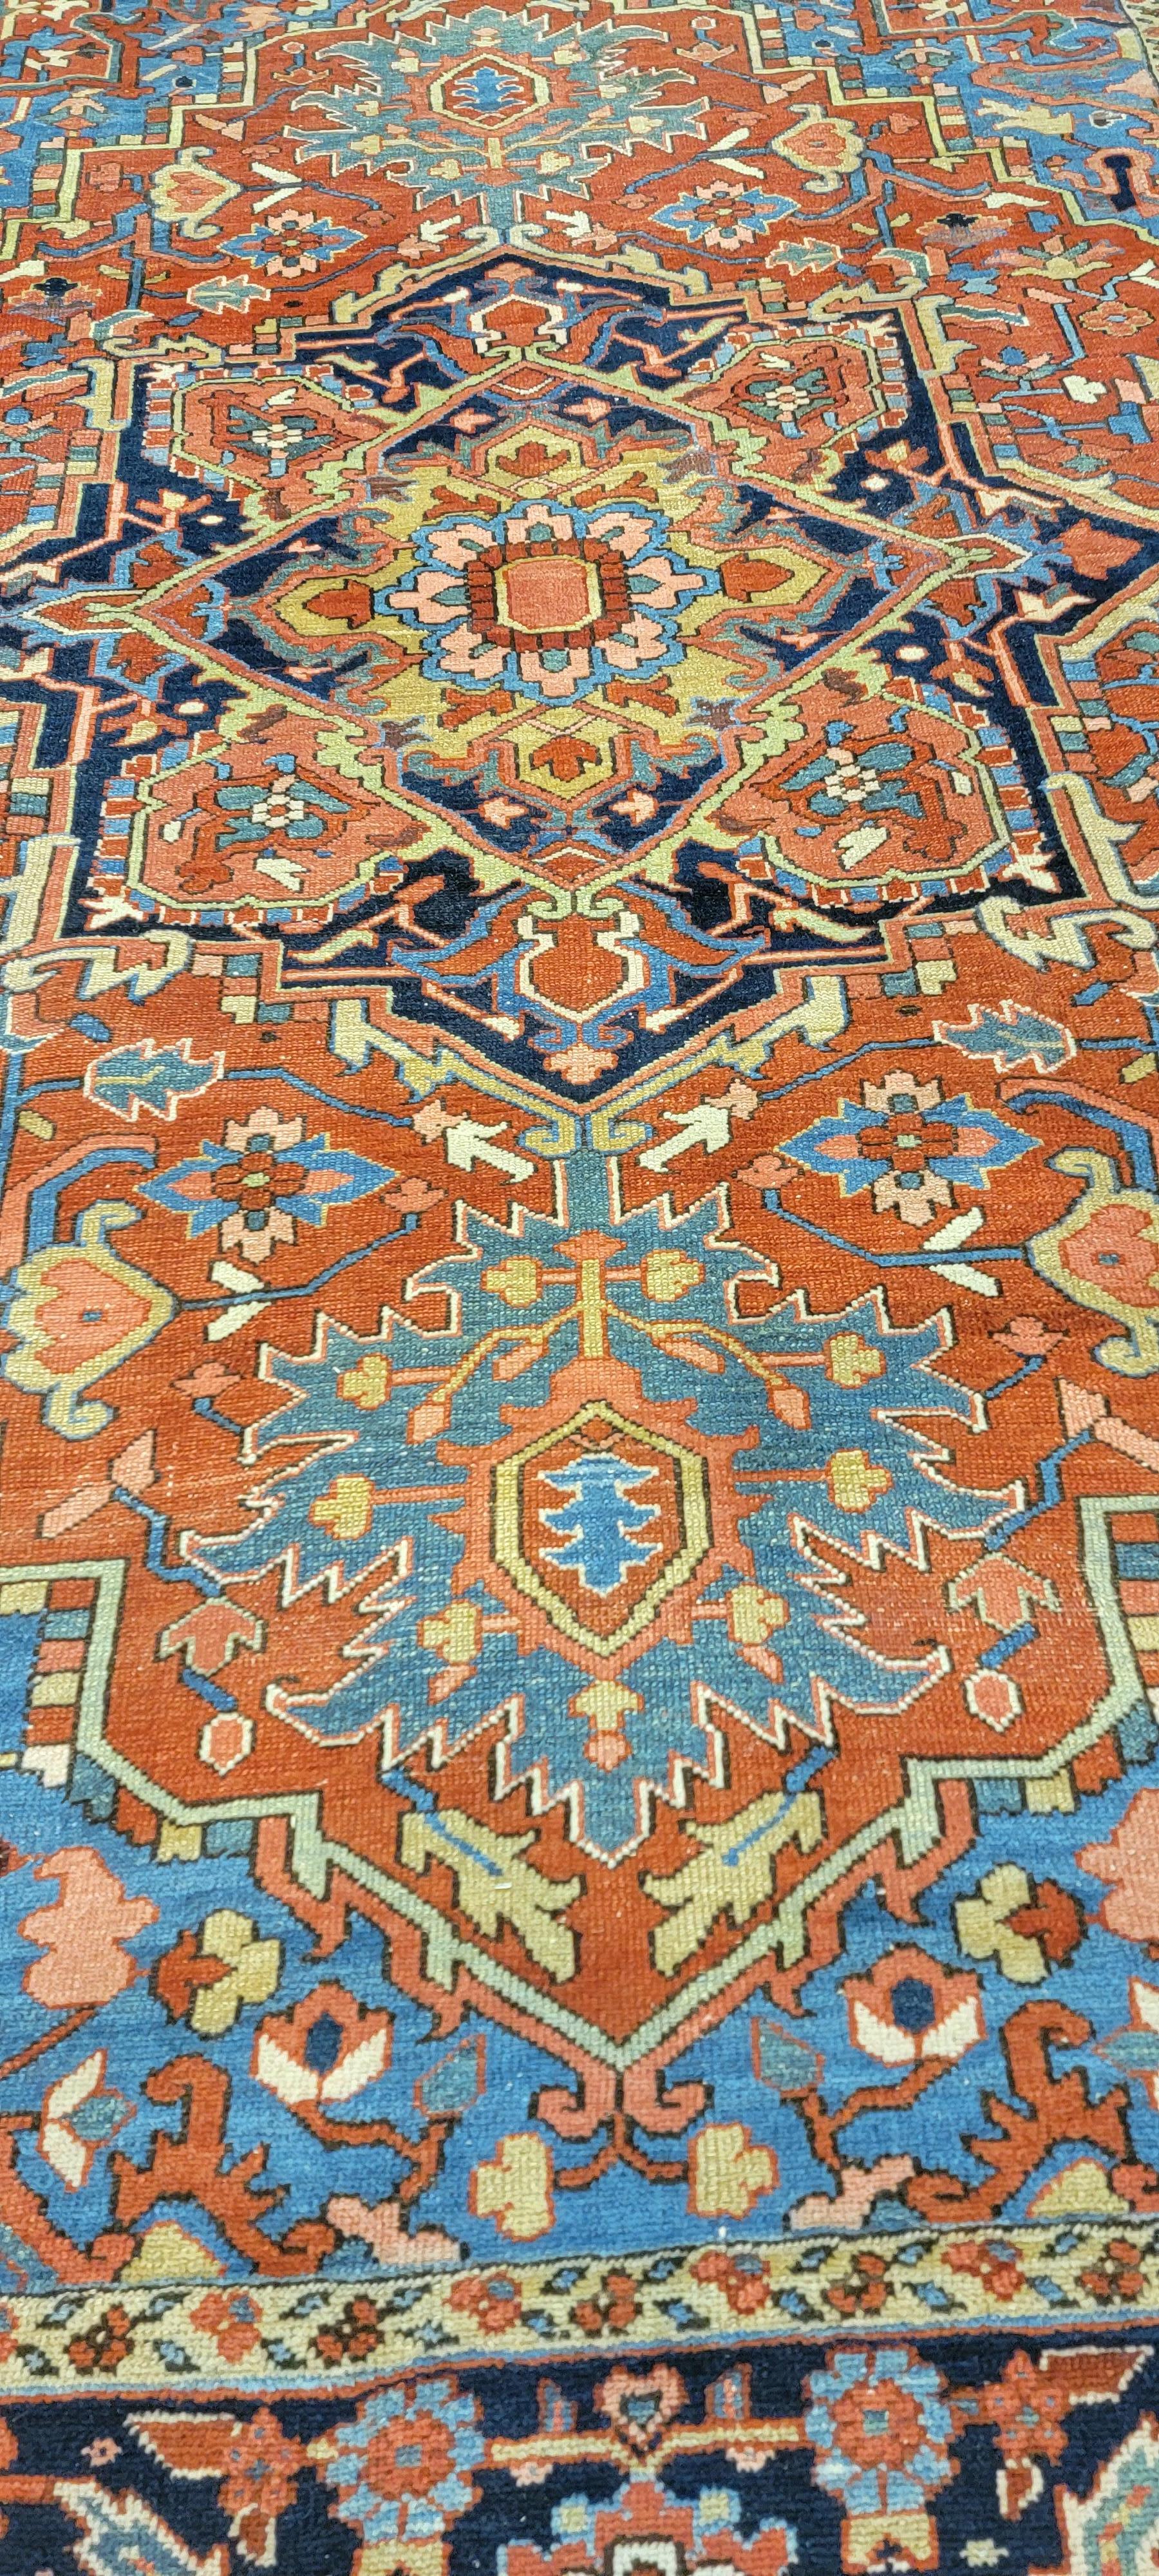 Early 20th Century Antique Persian Heriz Serapi Rug In Good Condition For Sale In Chamblee, GA